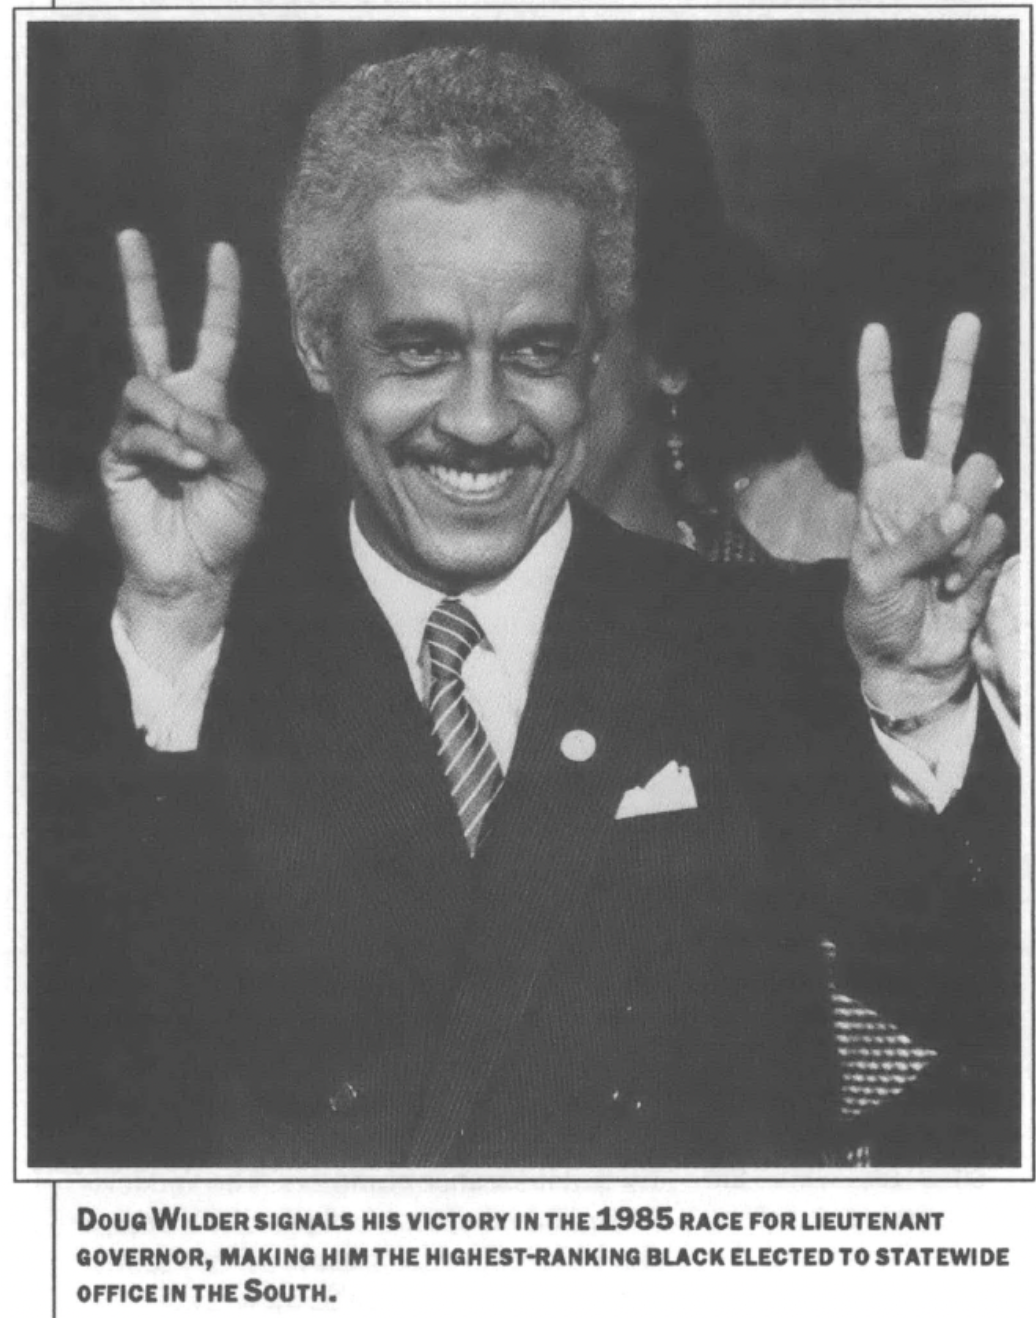 Doug Wilder throwing up two peace signs after winning 1985 lieutenant governor race